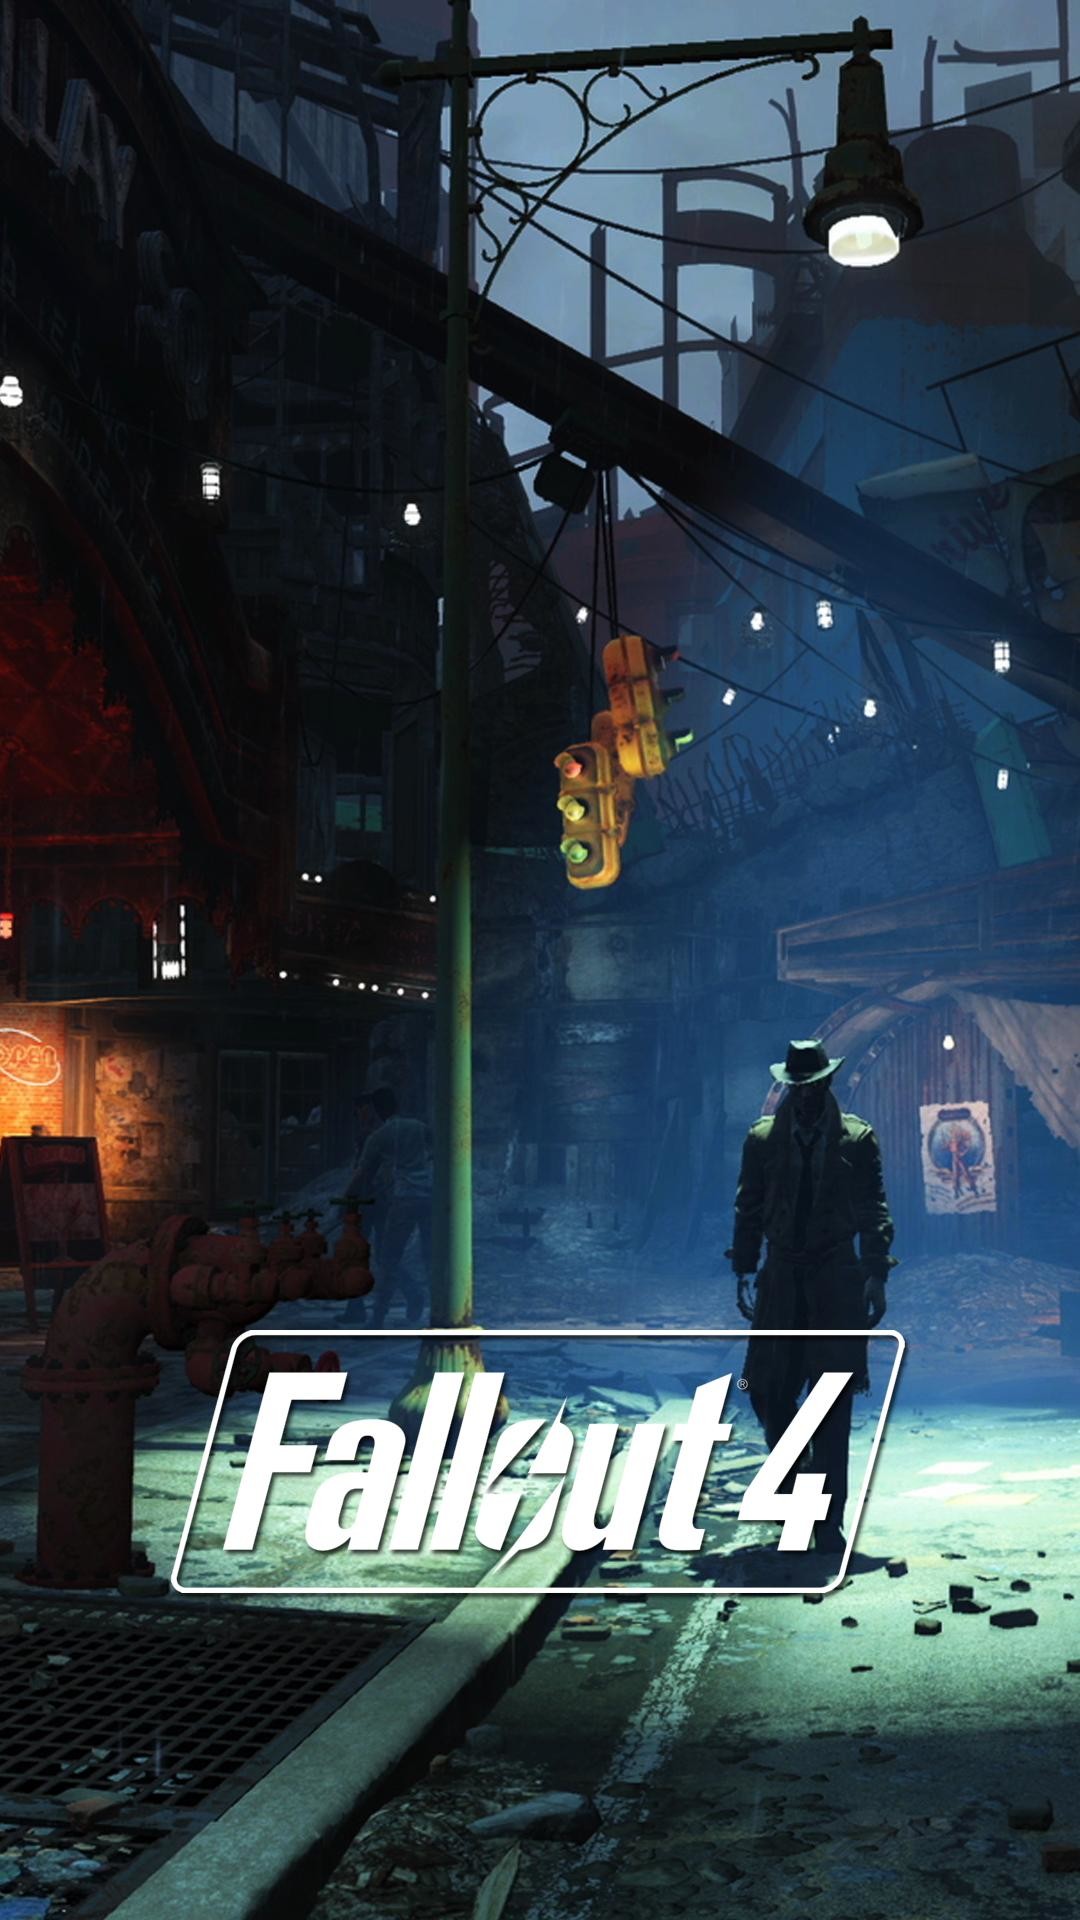 1080x1920 Put Fallout 4 on your phone with these lock screen wallpapers .